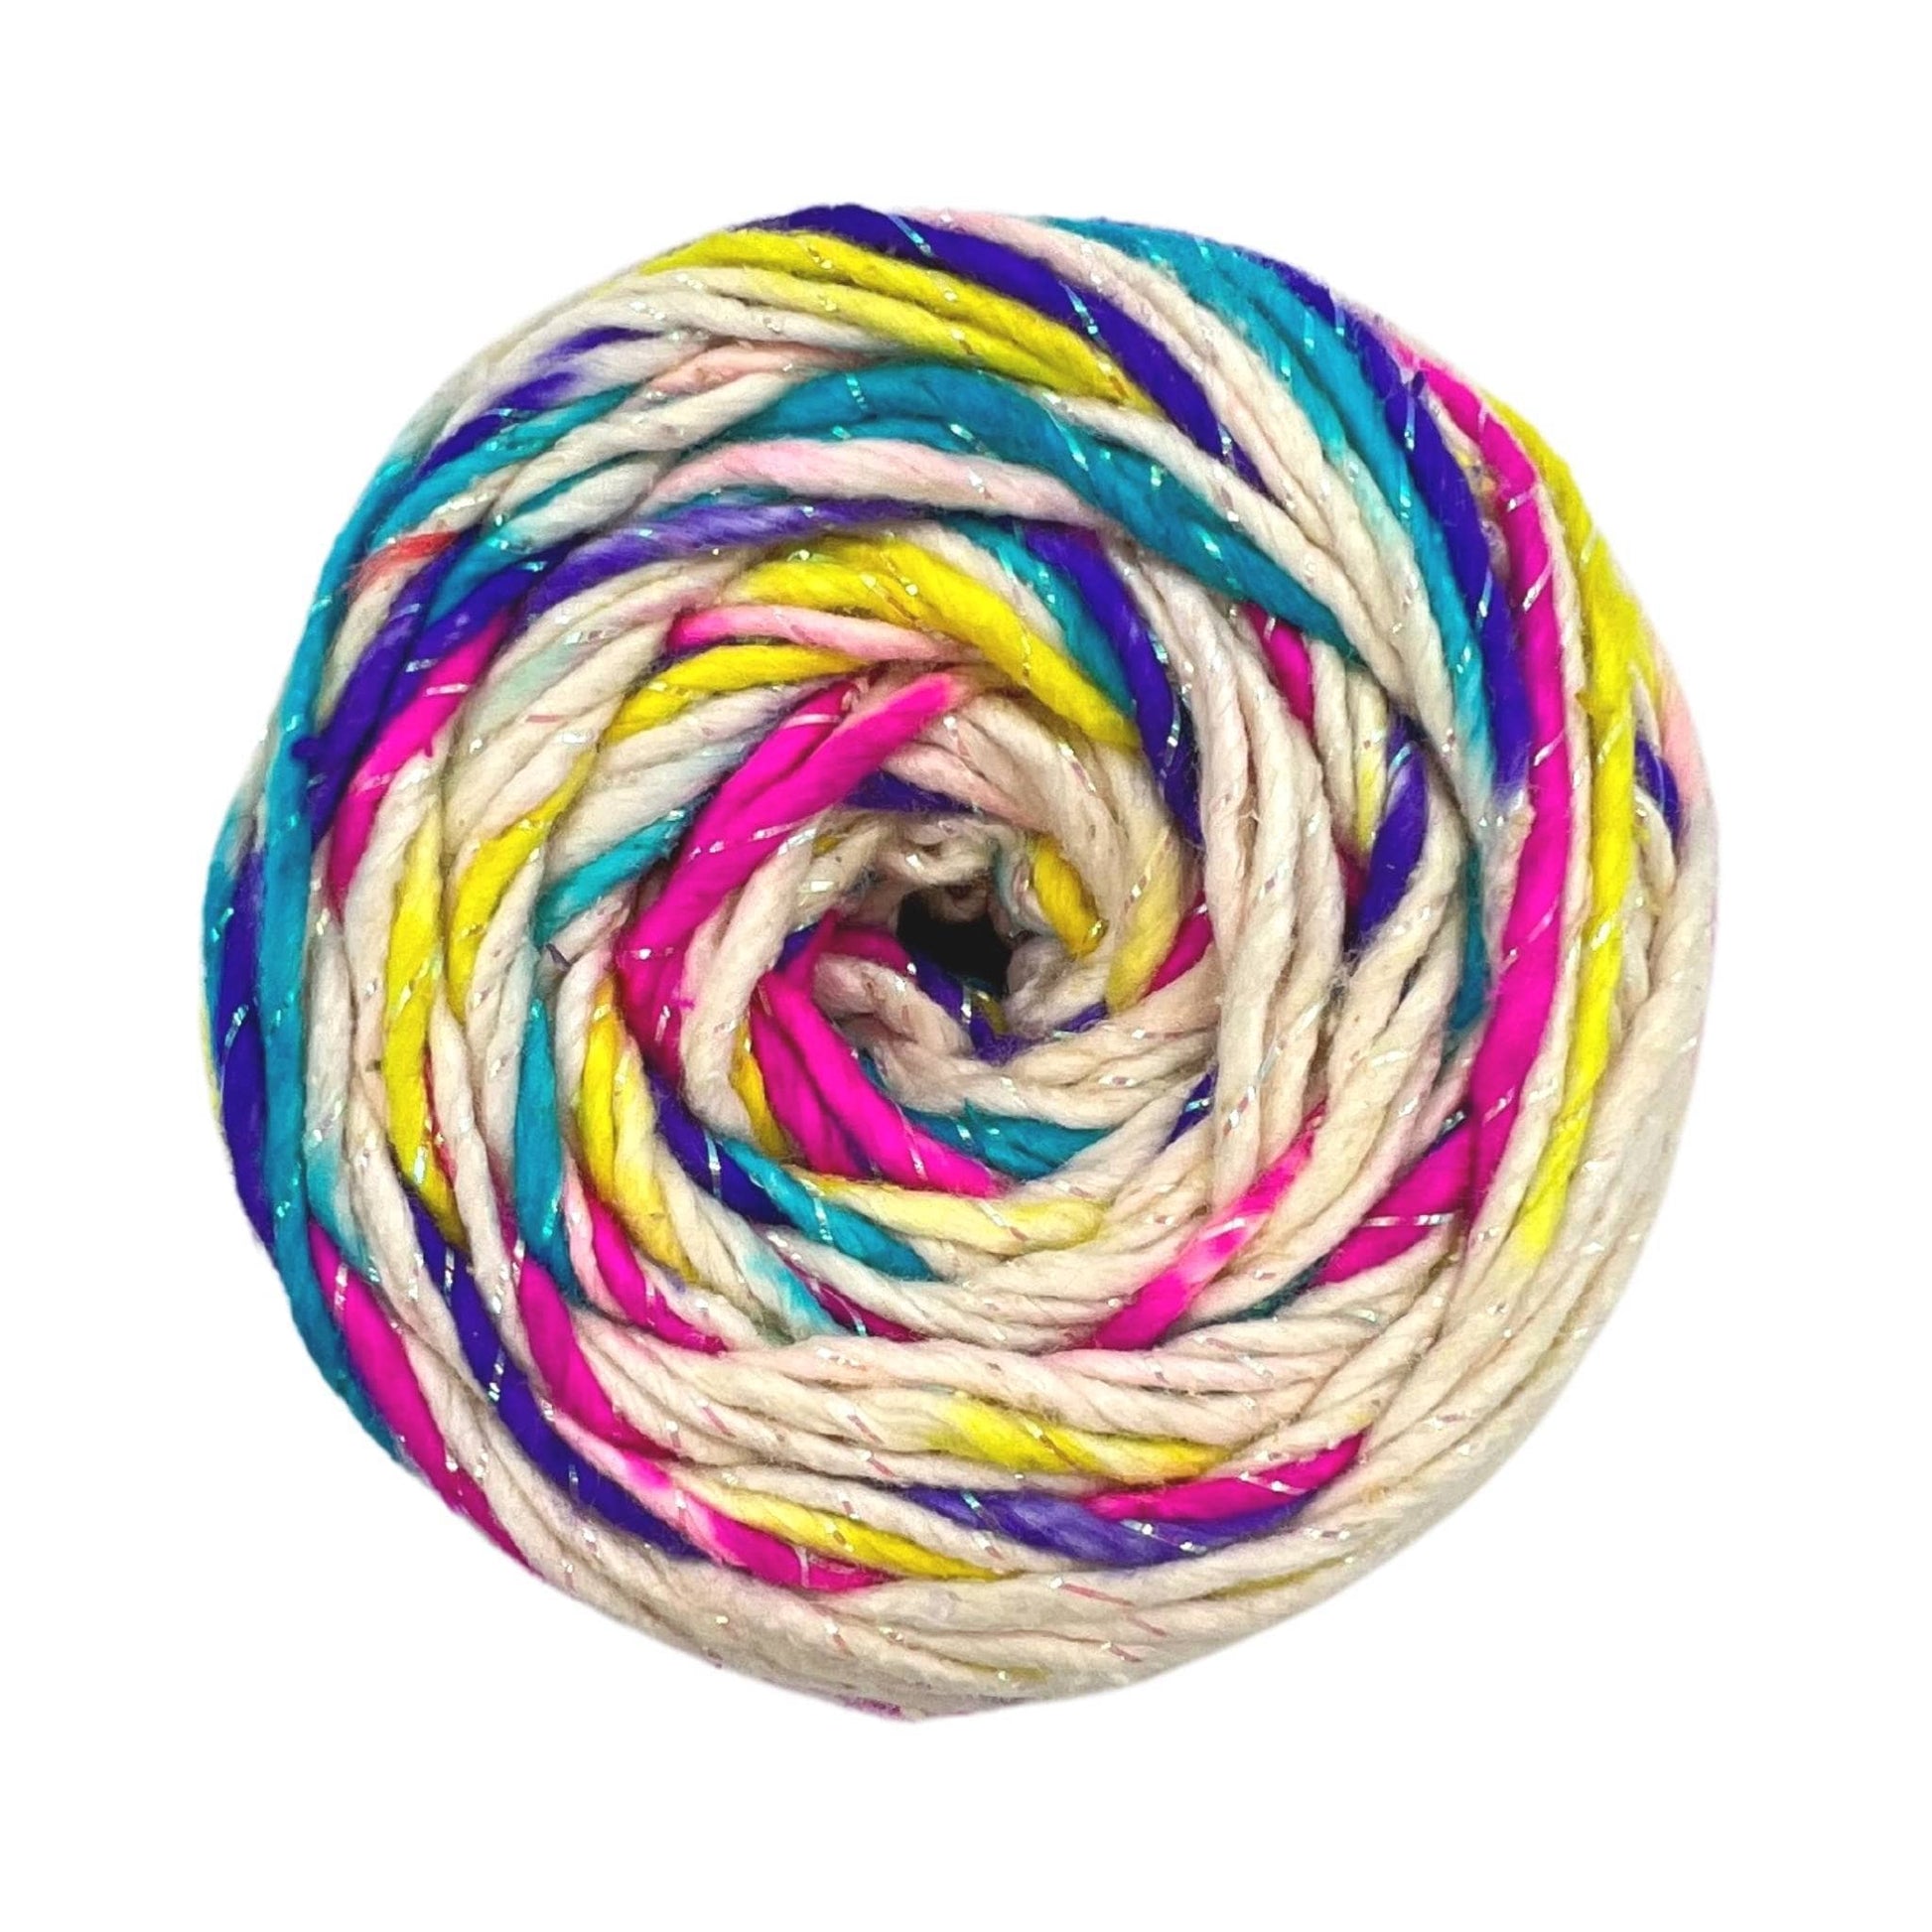 Single skein of sparkle worsted weight recycled silk yarn in birthday cake (white undyed base with a mix of blues, pinks and yellows mixed in.) colorway in front of a white background. This skein is also spun with a strand of sparkle in it.